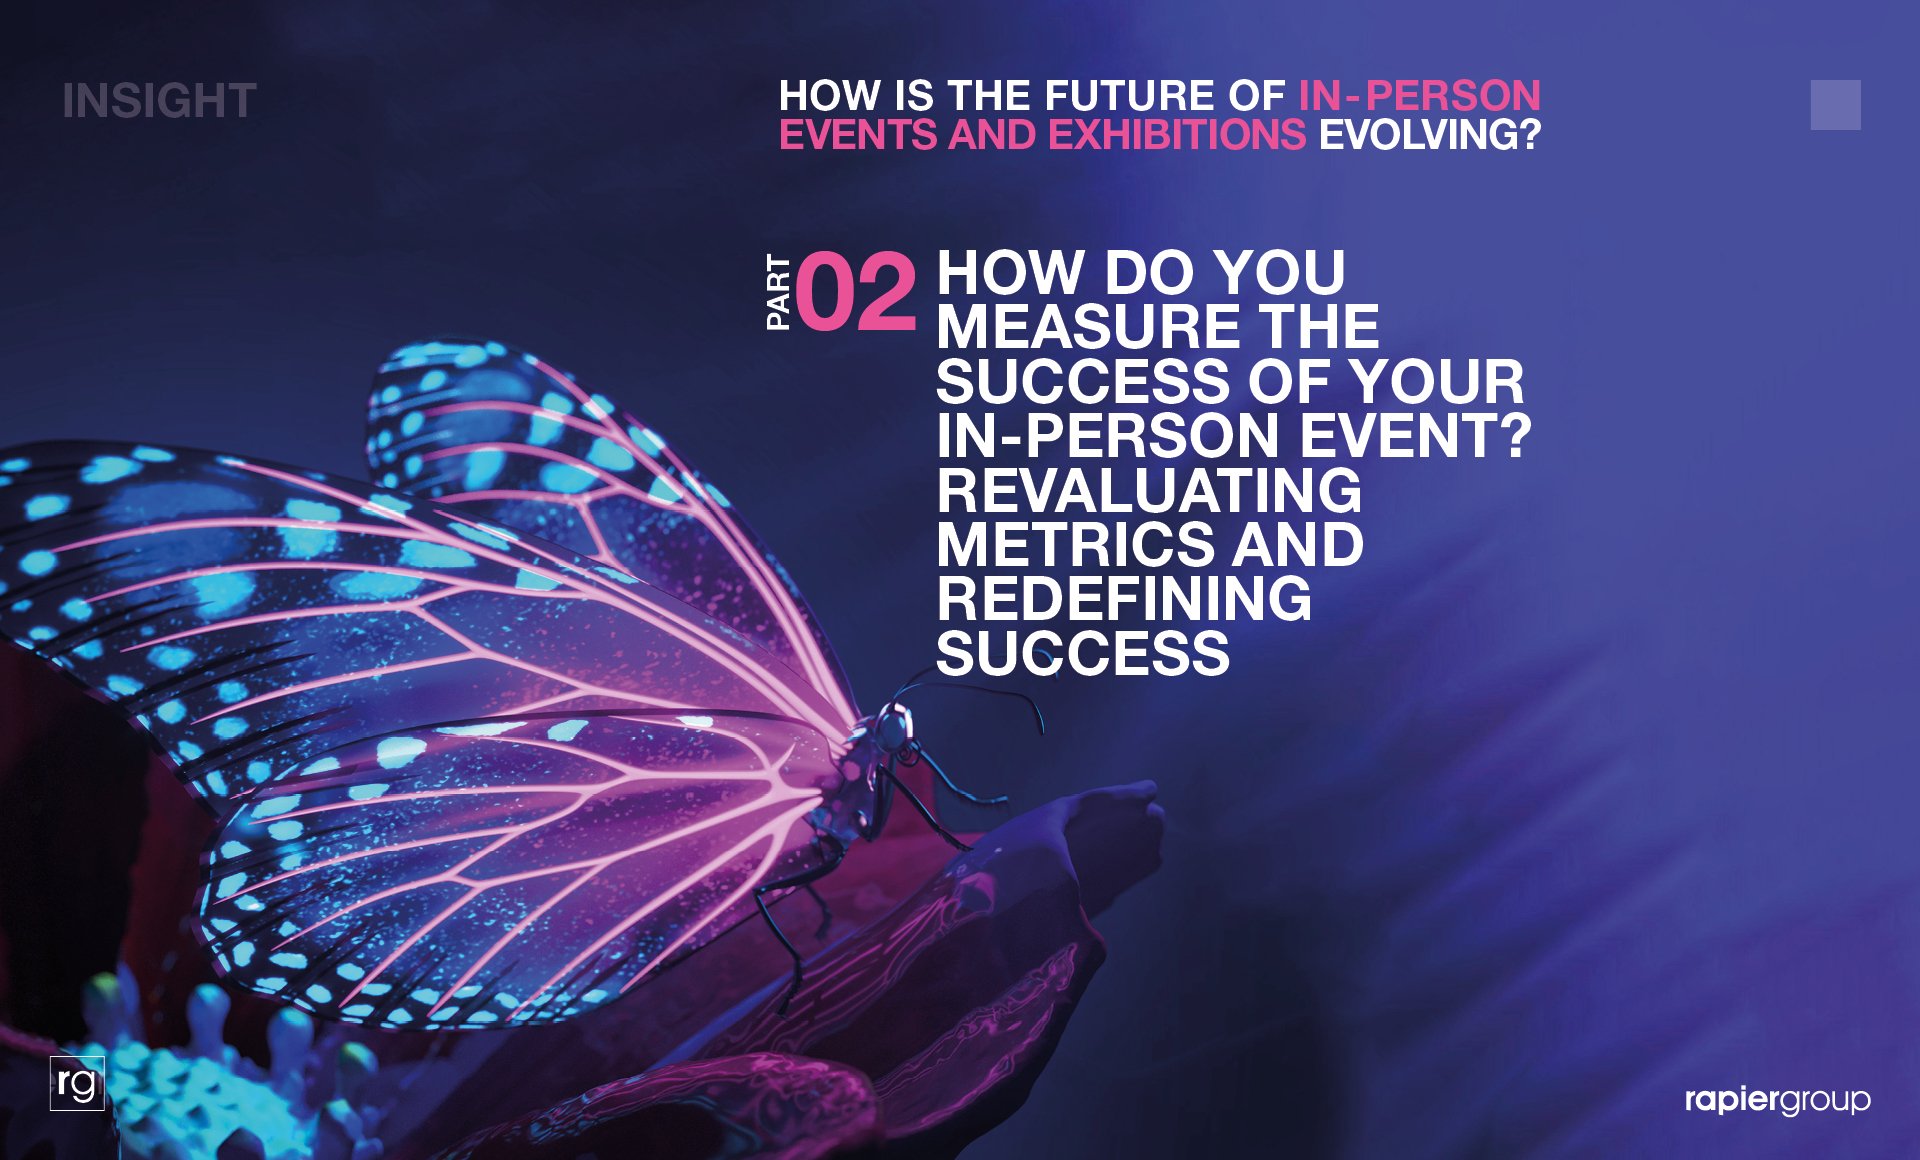 How do you measure the success of your in-person event Revaluating metrics and redefining success